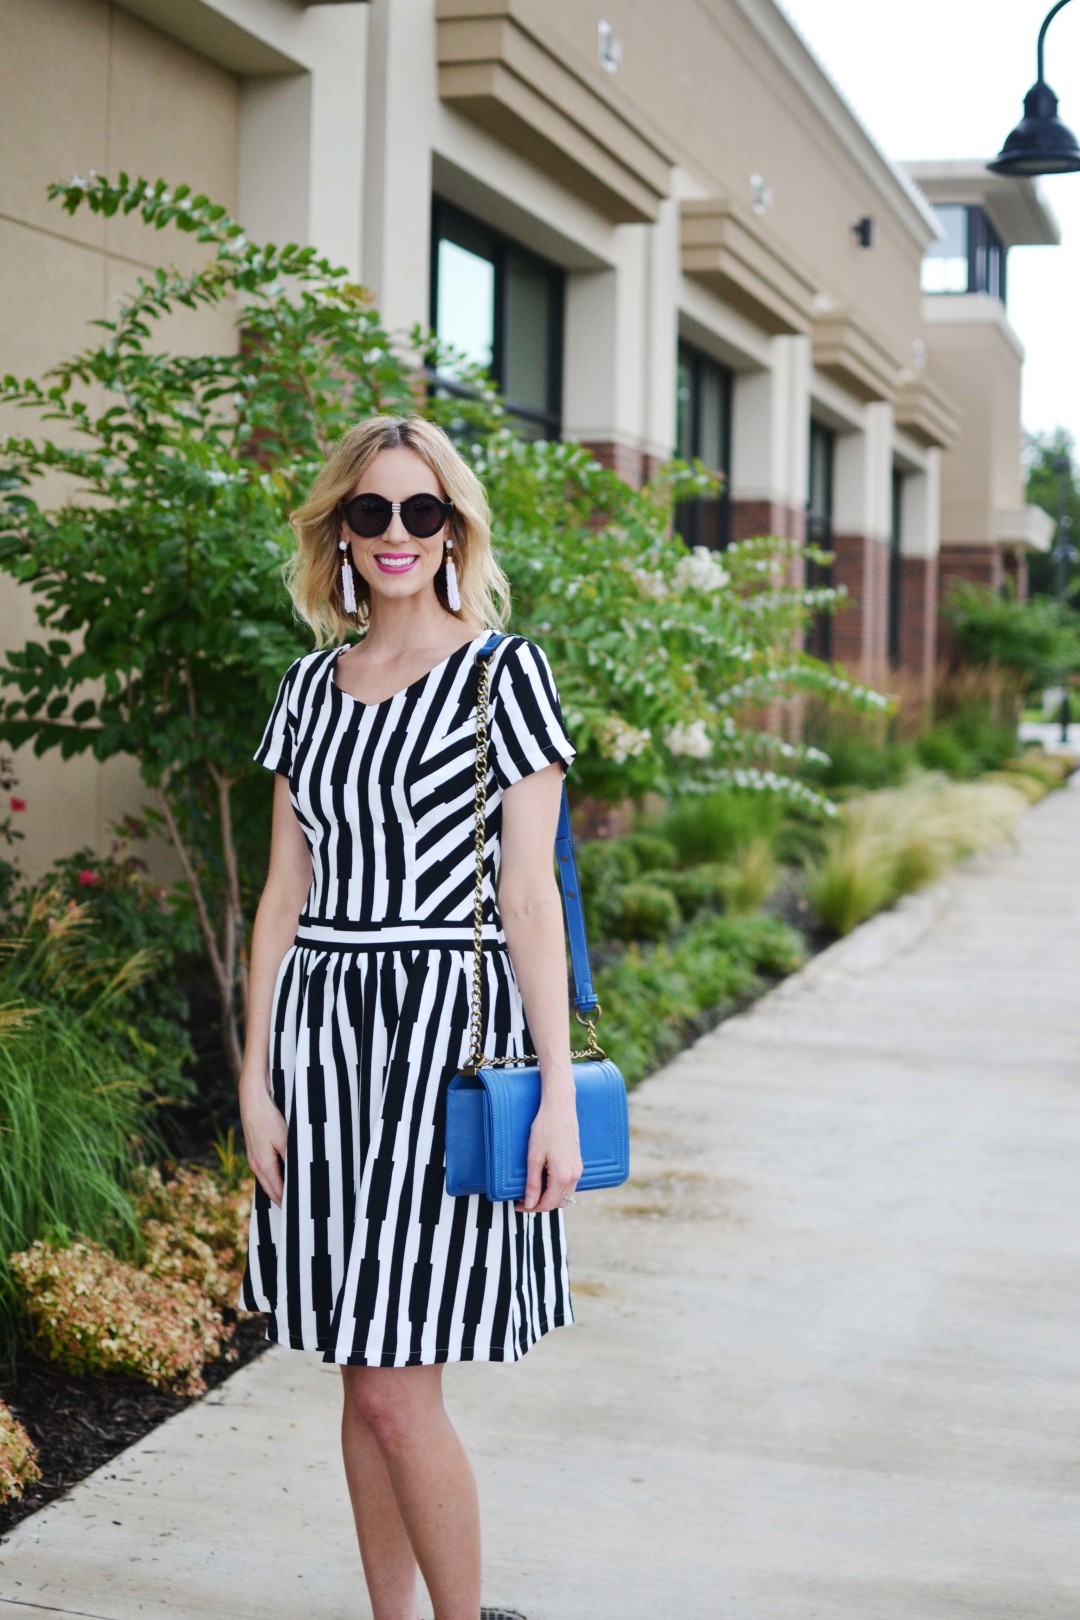 Striped Dress and Floral Heels - Straight A Style